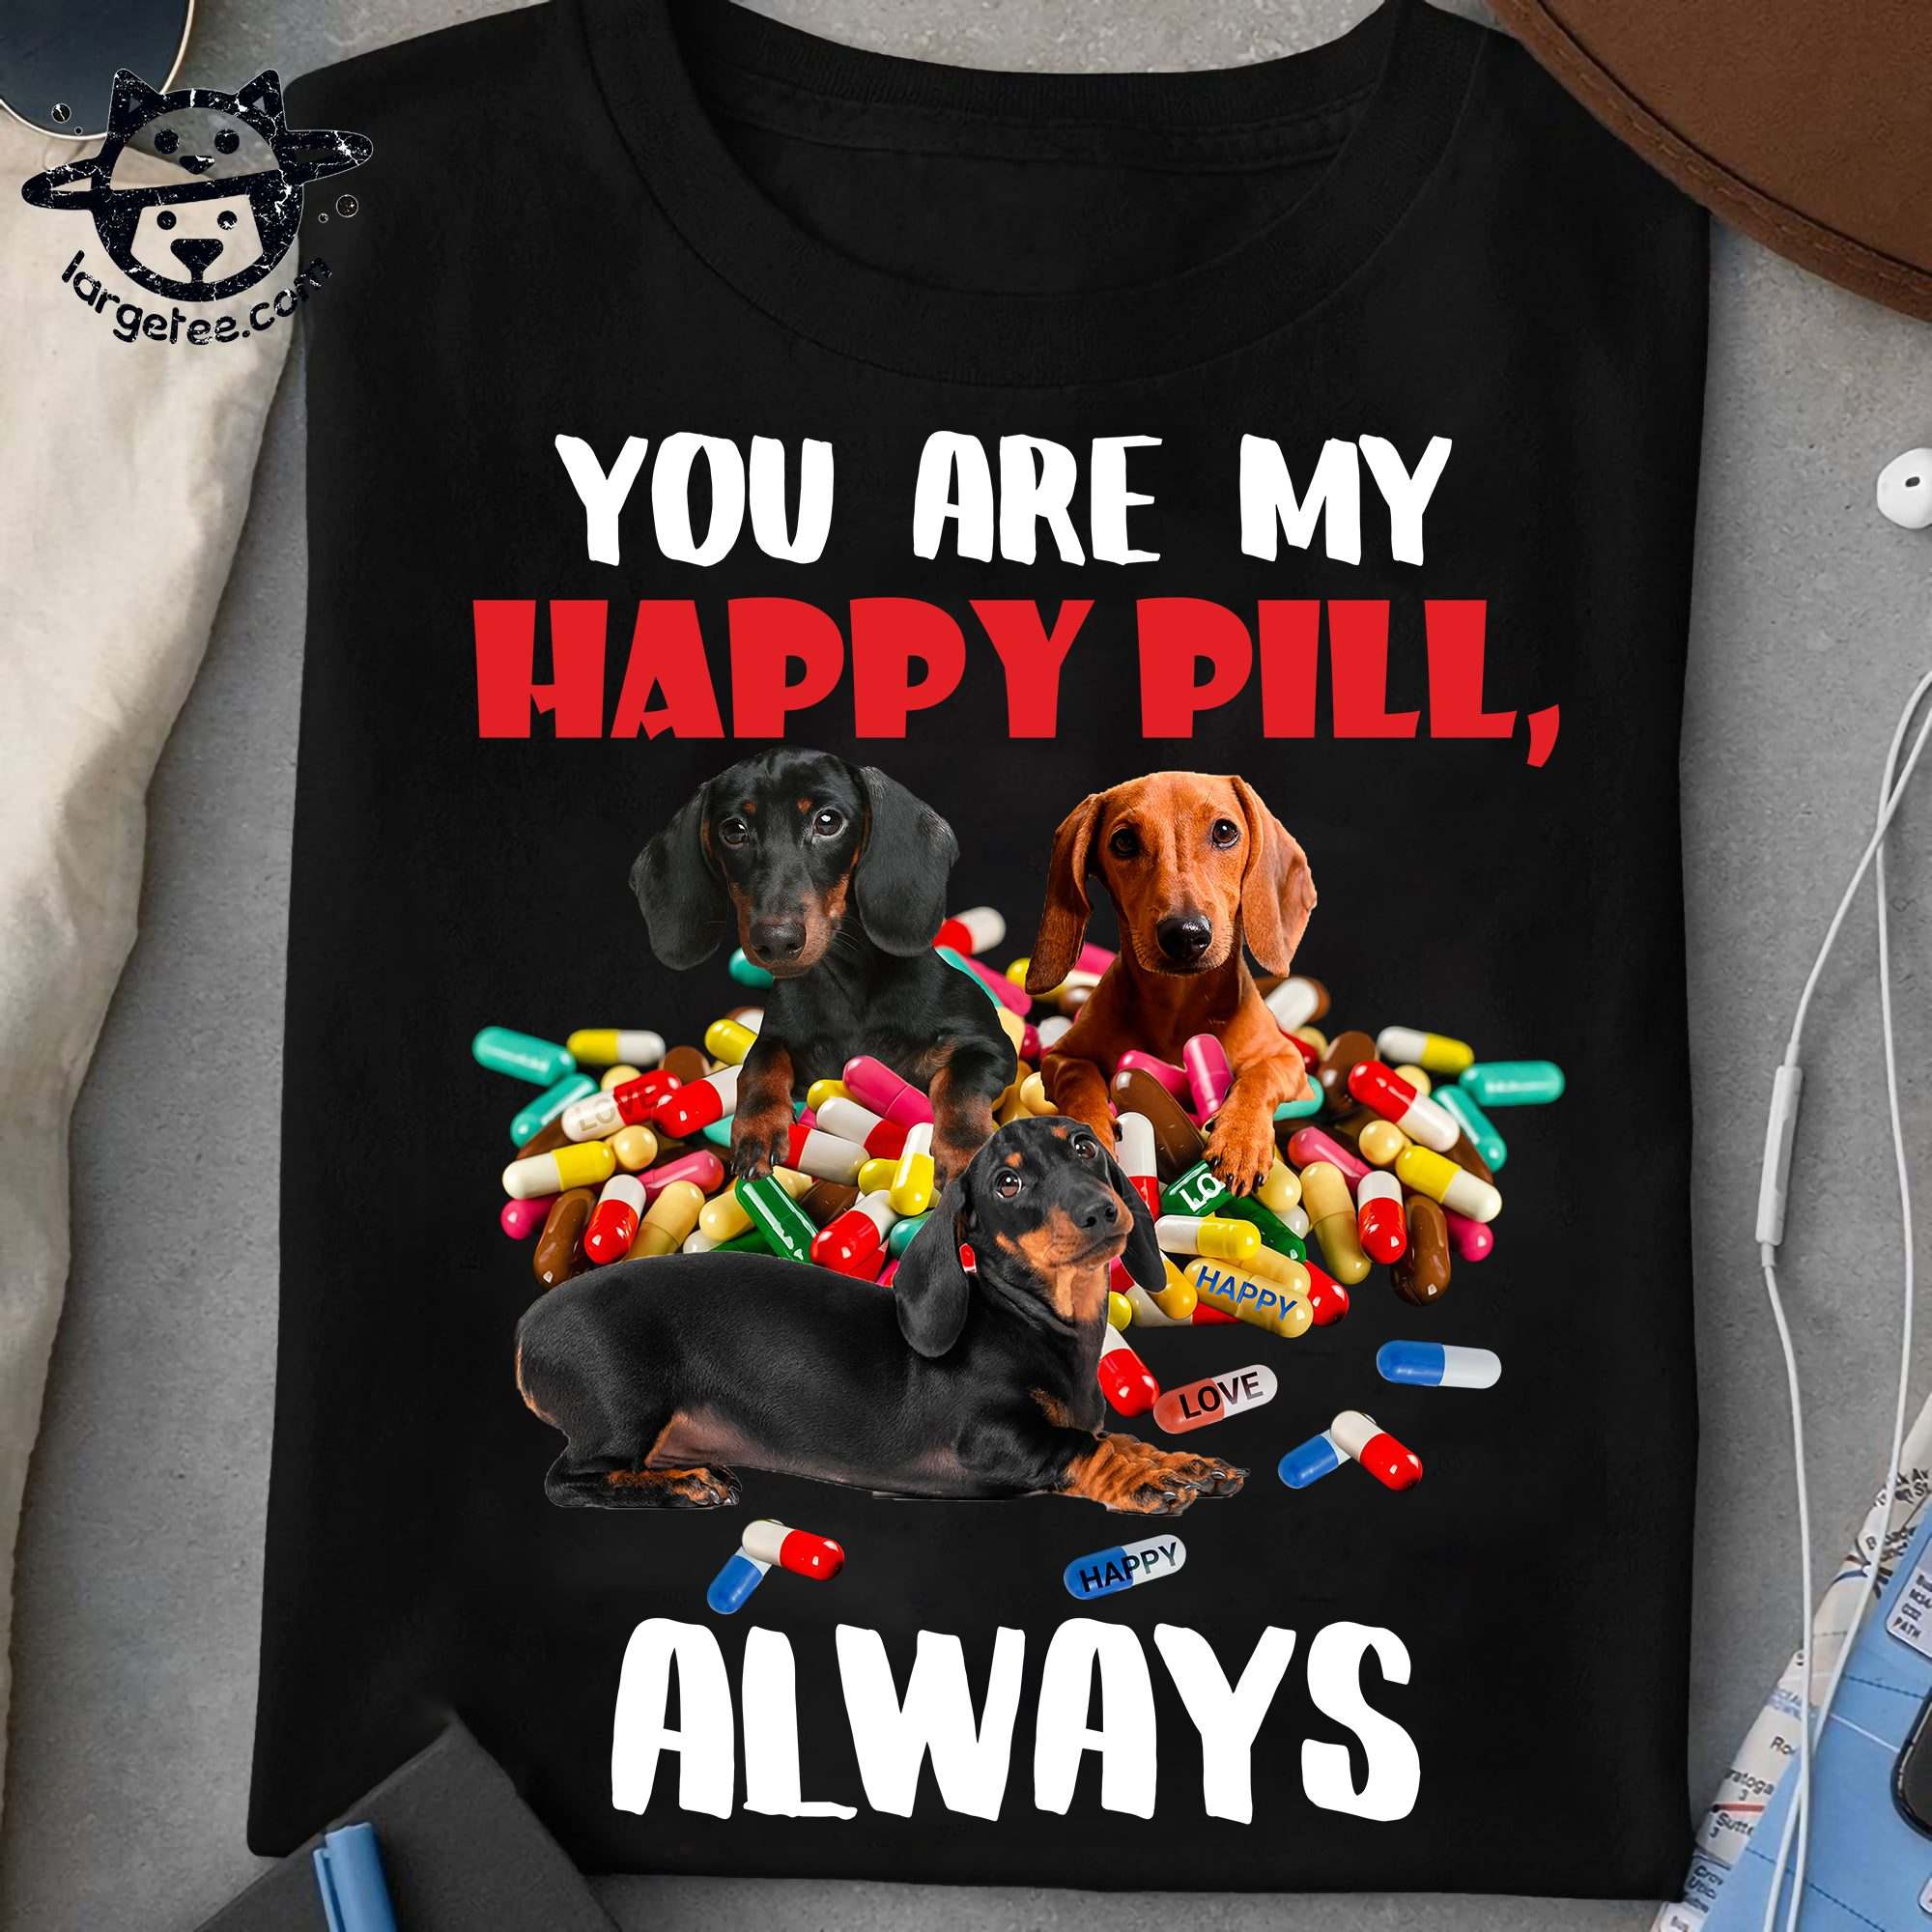 You are my happy pill, always - Dachshund happy pill